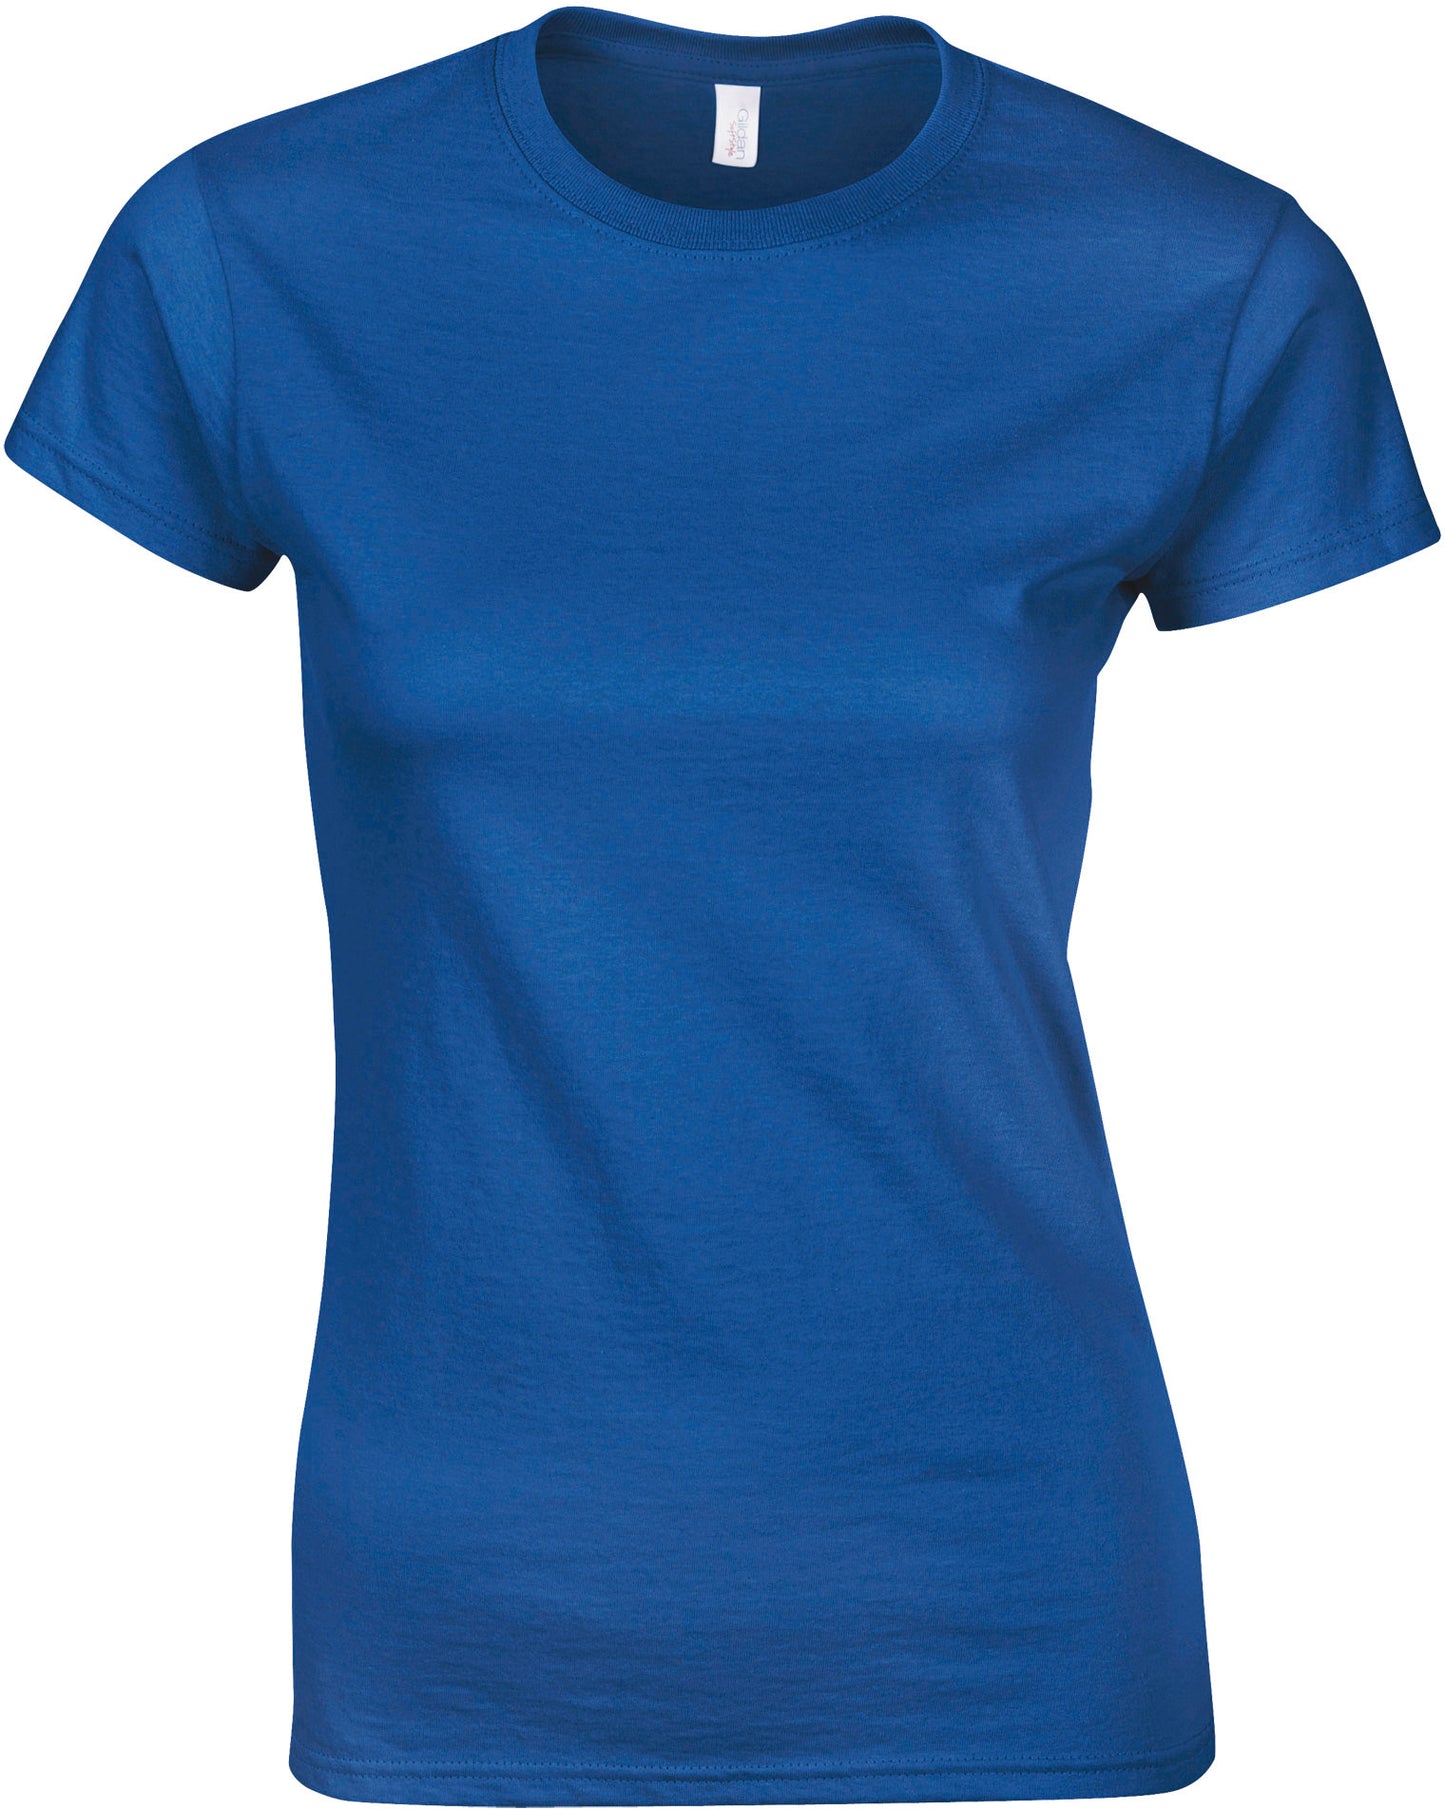 GI6400L - T-shirt femme col rond Softstyle